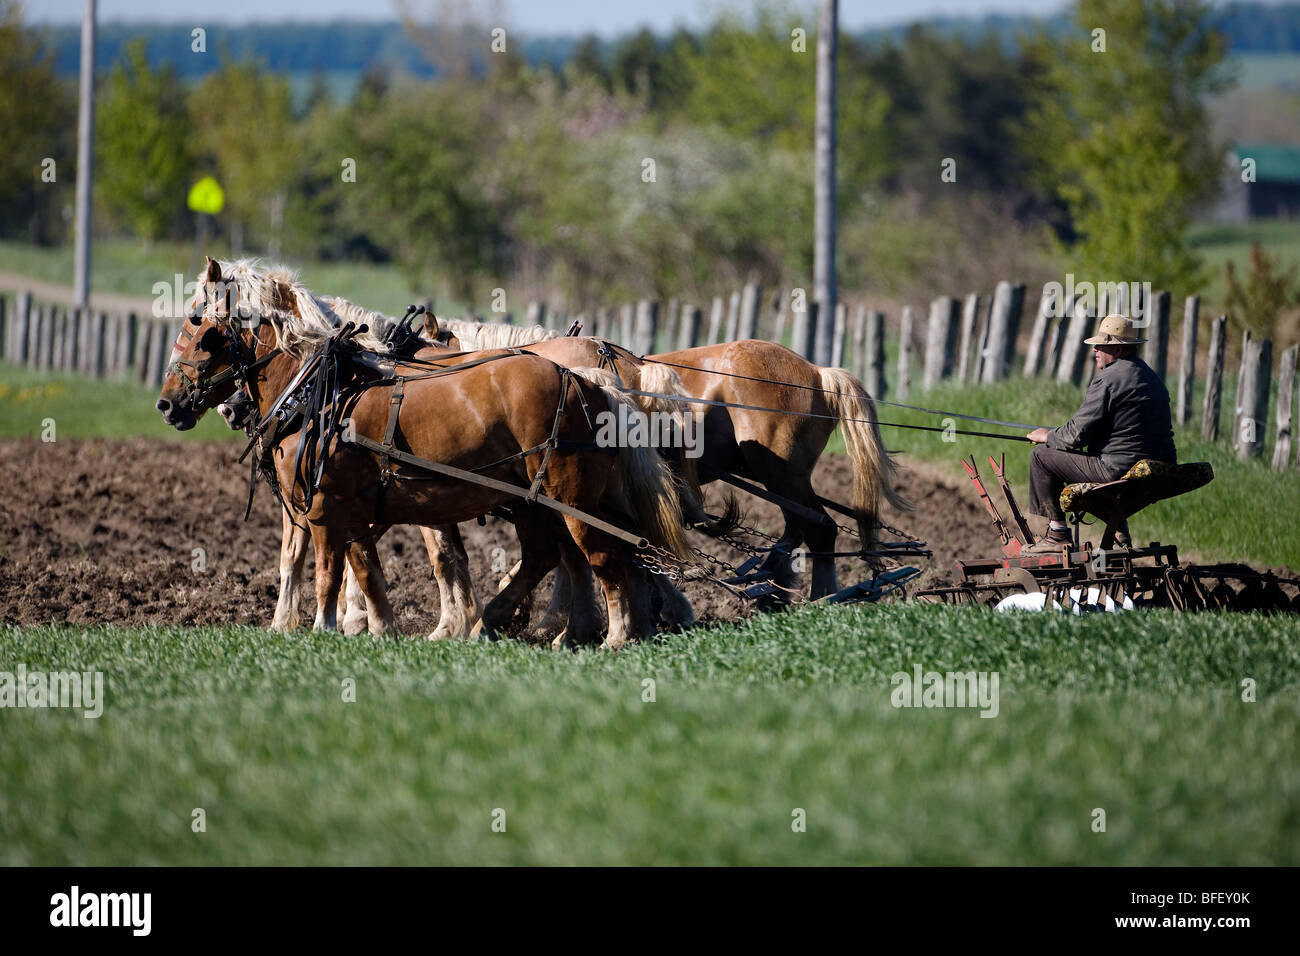 Working the soil by horse team in Mennonite country north of Waterloo, Ontario, Canada Stock Photo